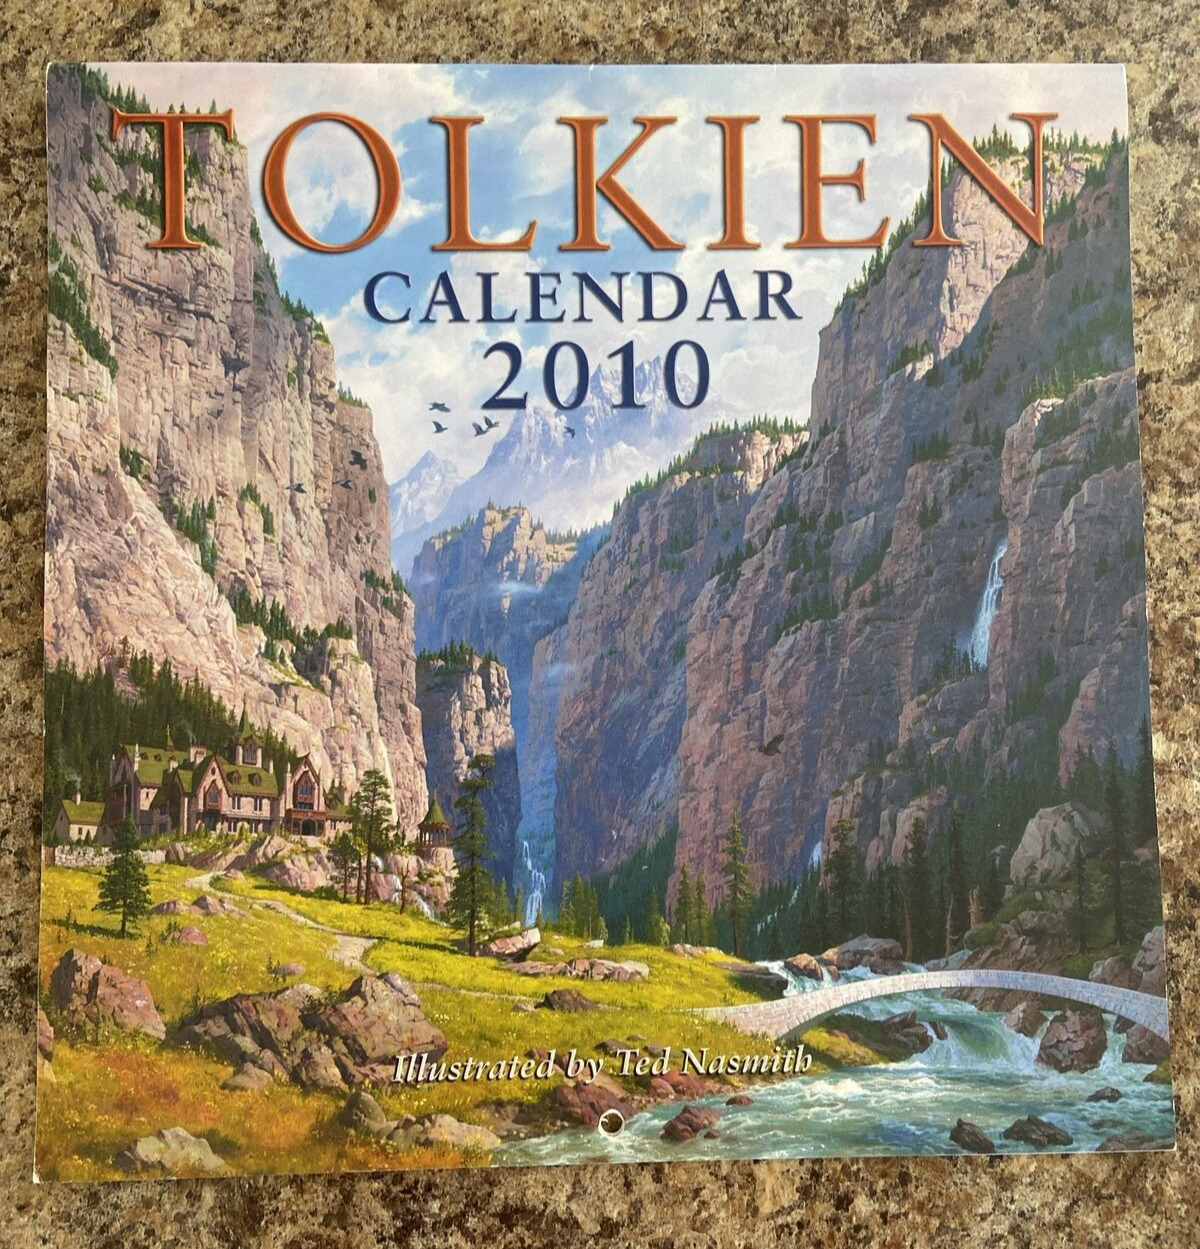 J.R.R. Tolkien Calendar 2010 Illustrated By Ted Nasmith LOTR HarperCollins